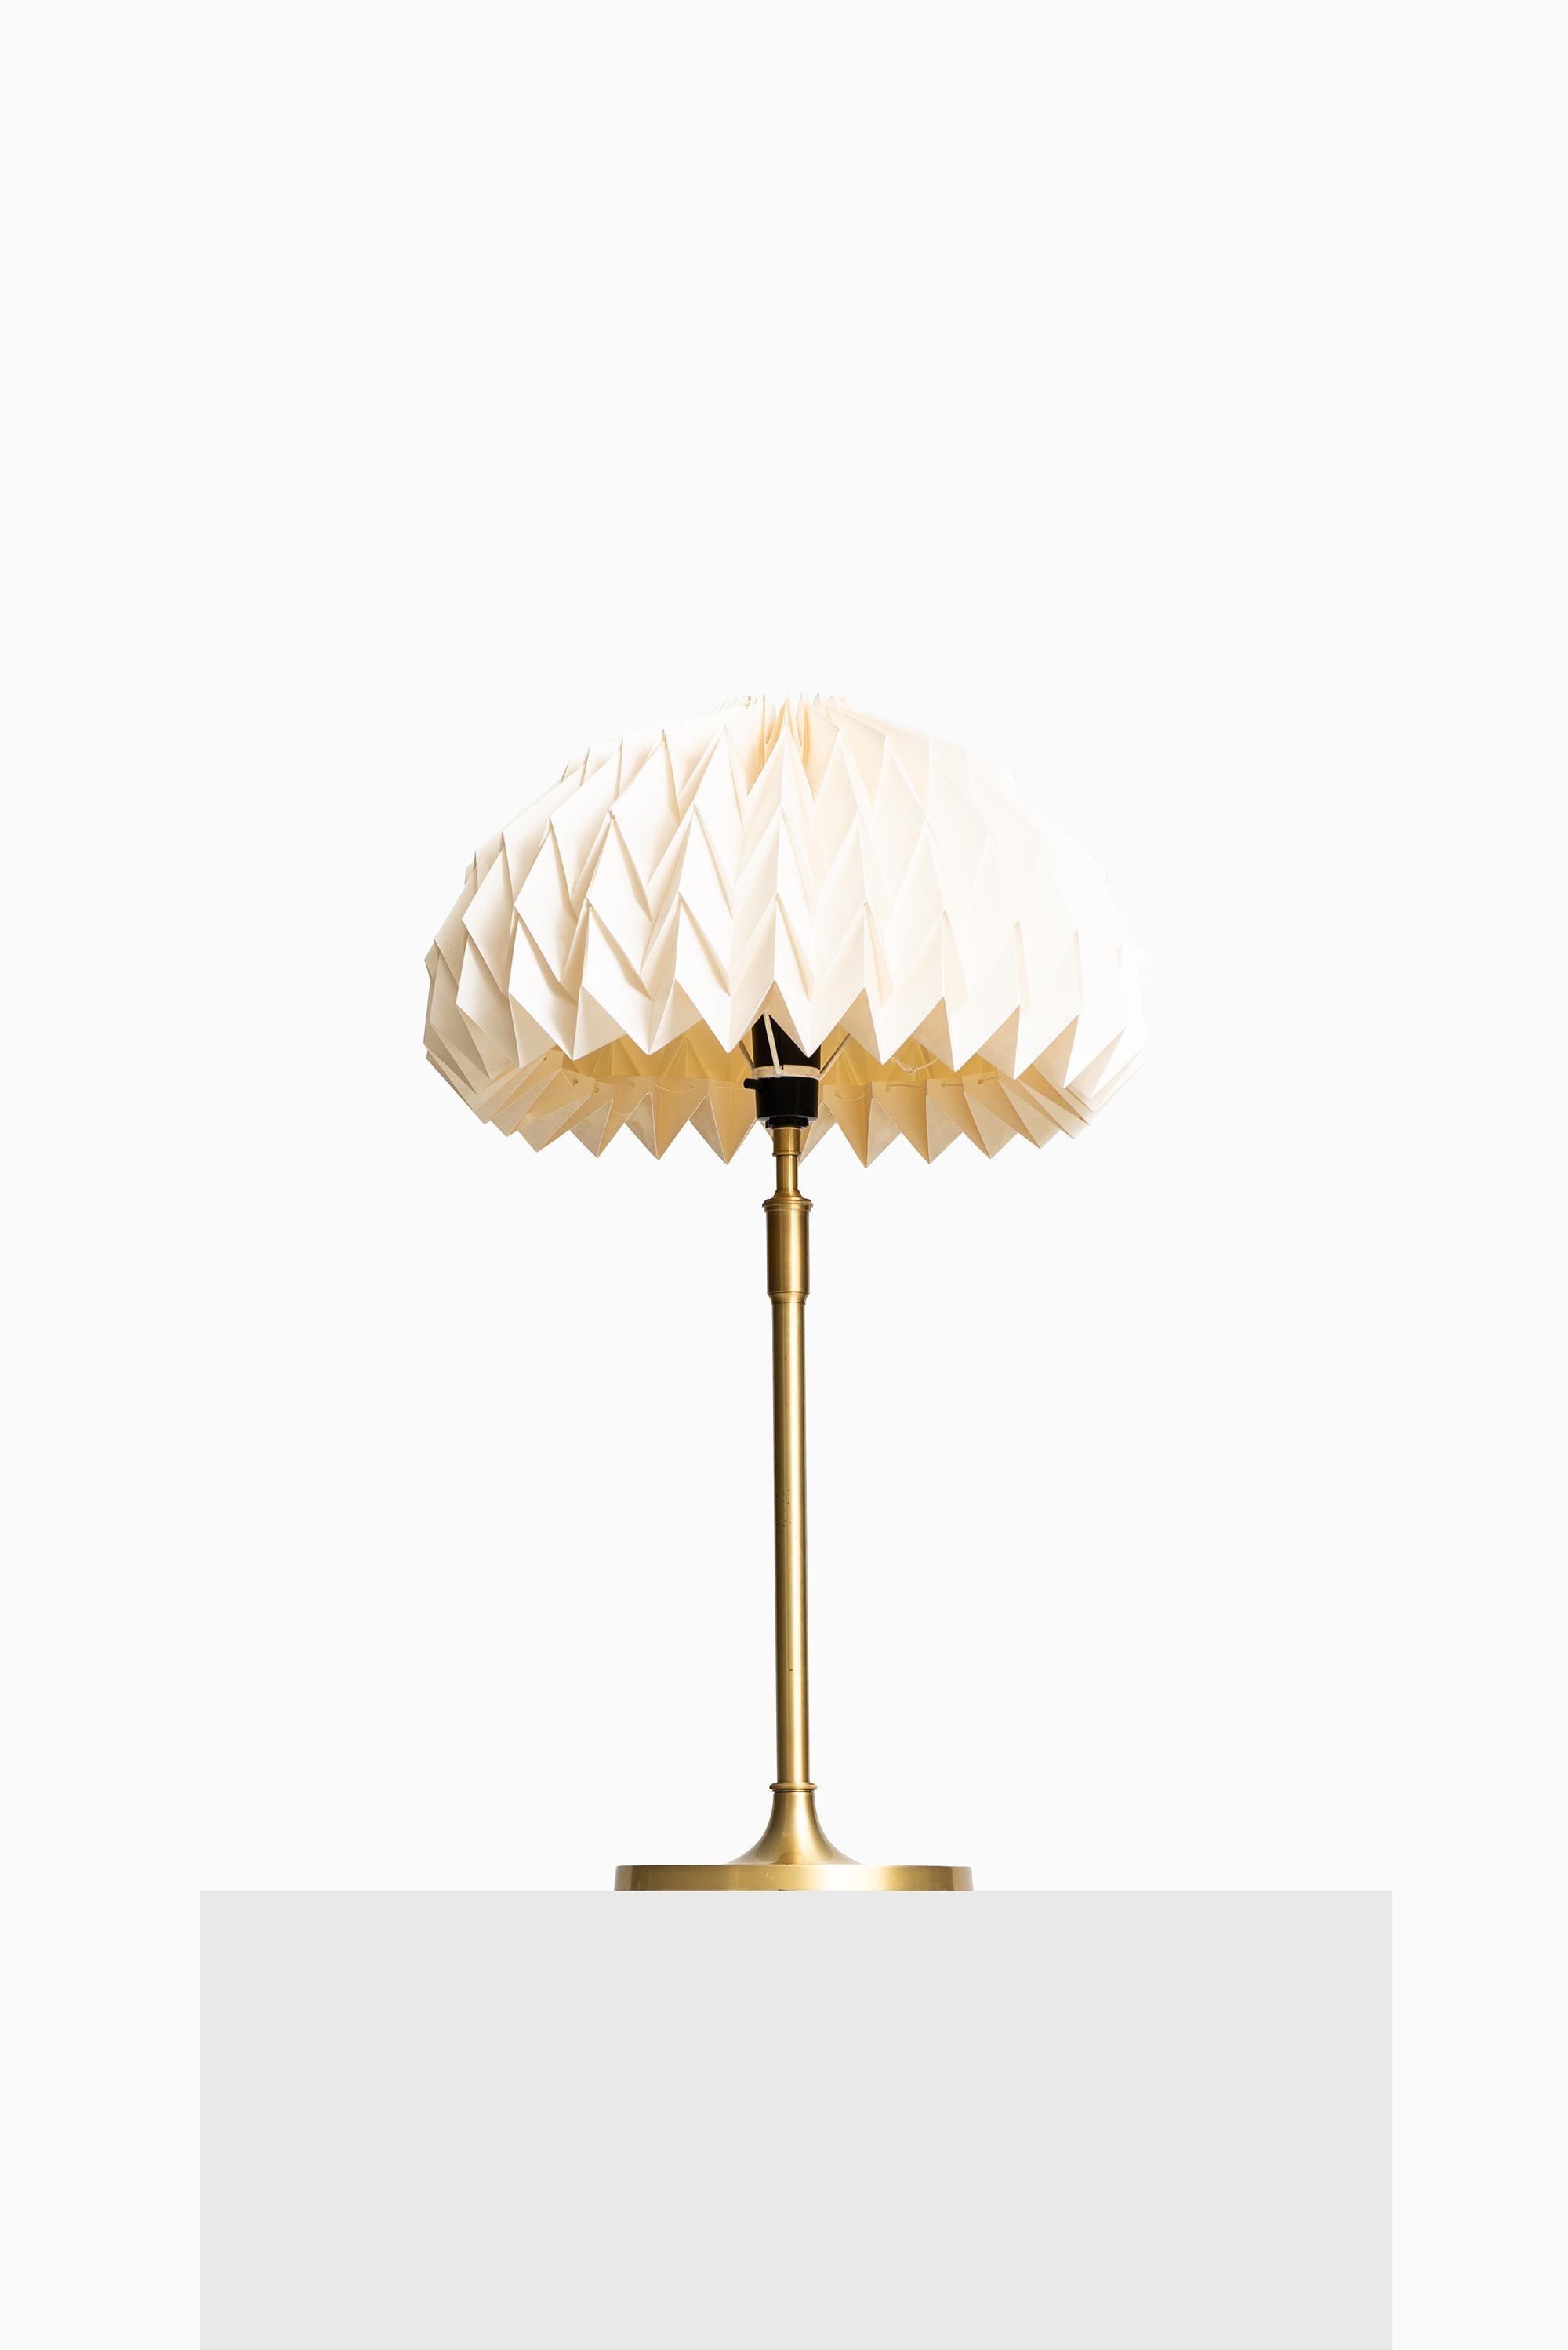 Rare pair of height adjustable table lamps model 307 designed by Esben Klint. Produced by Le Klint in Denmark.